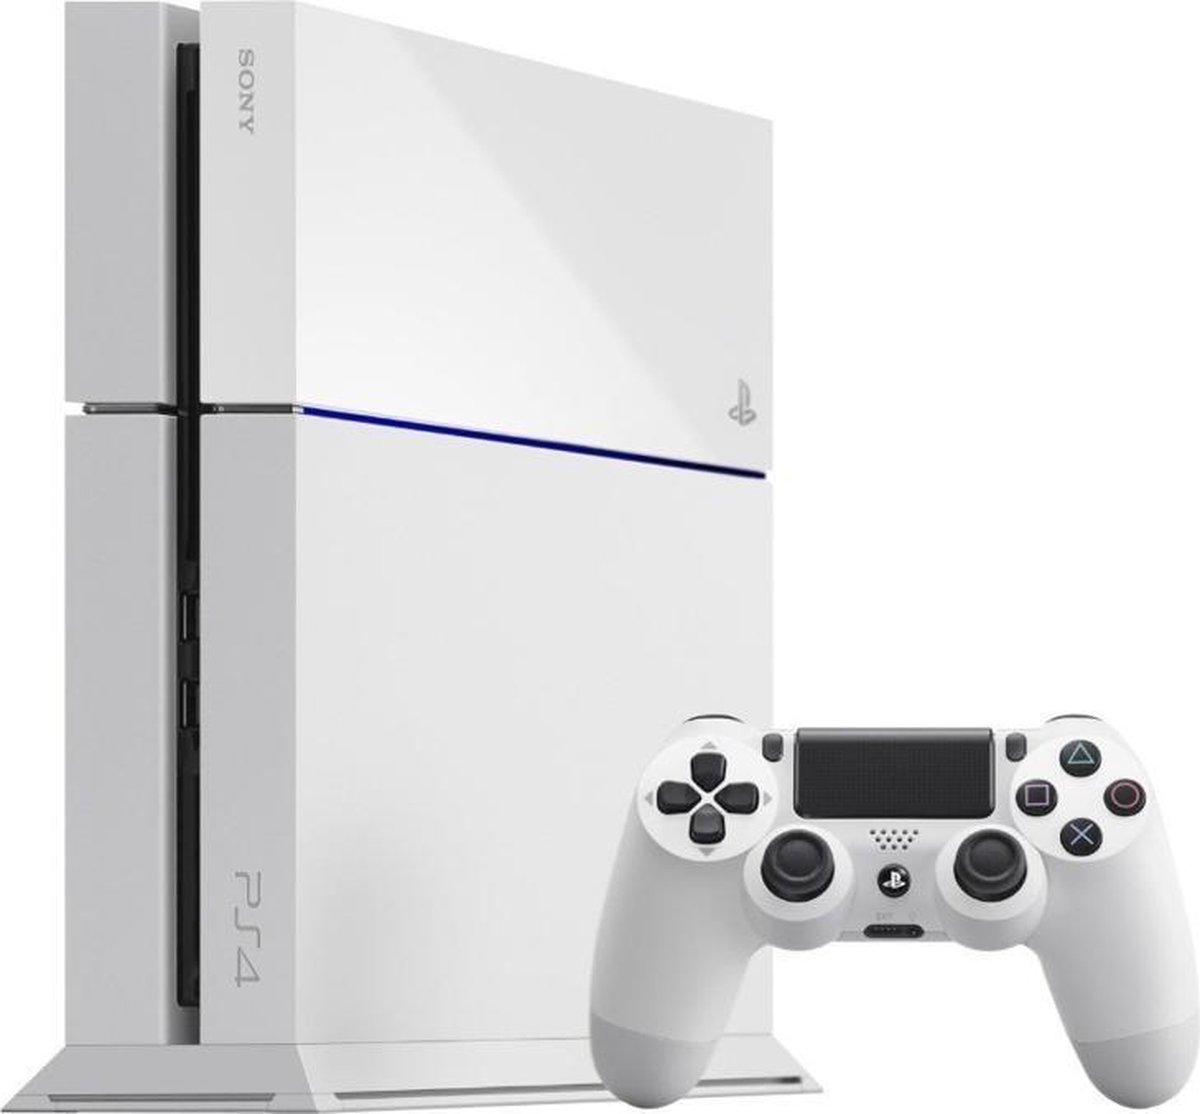 Vernederen Overtuiging geloof Sony PlayStation 4 Console - 500GB - PS4 Wit | bol.com